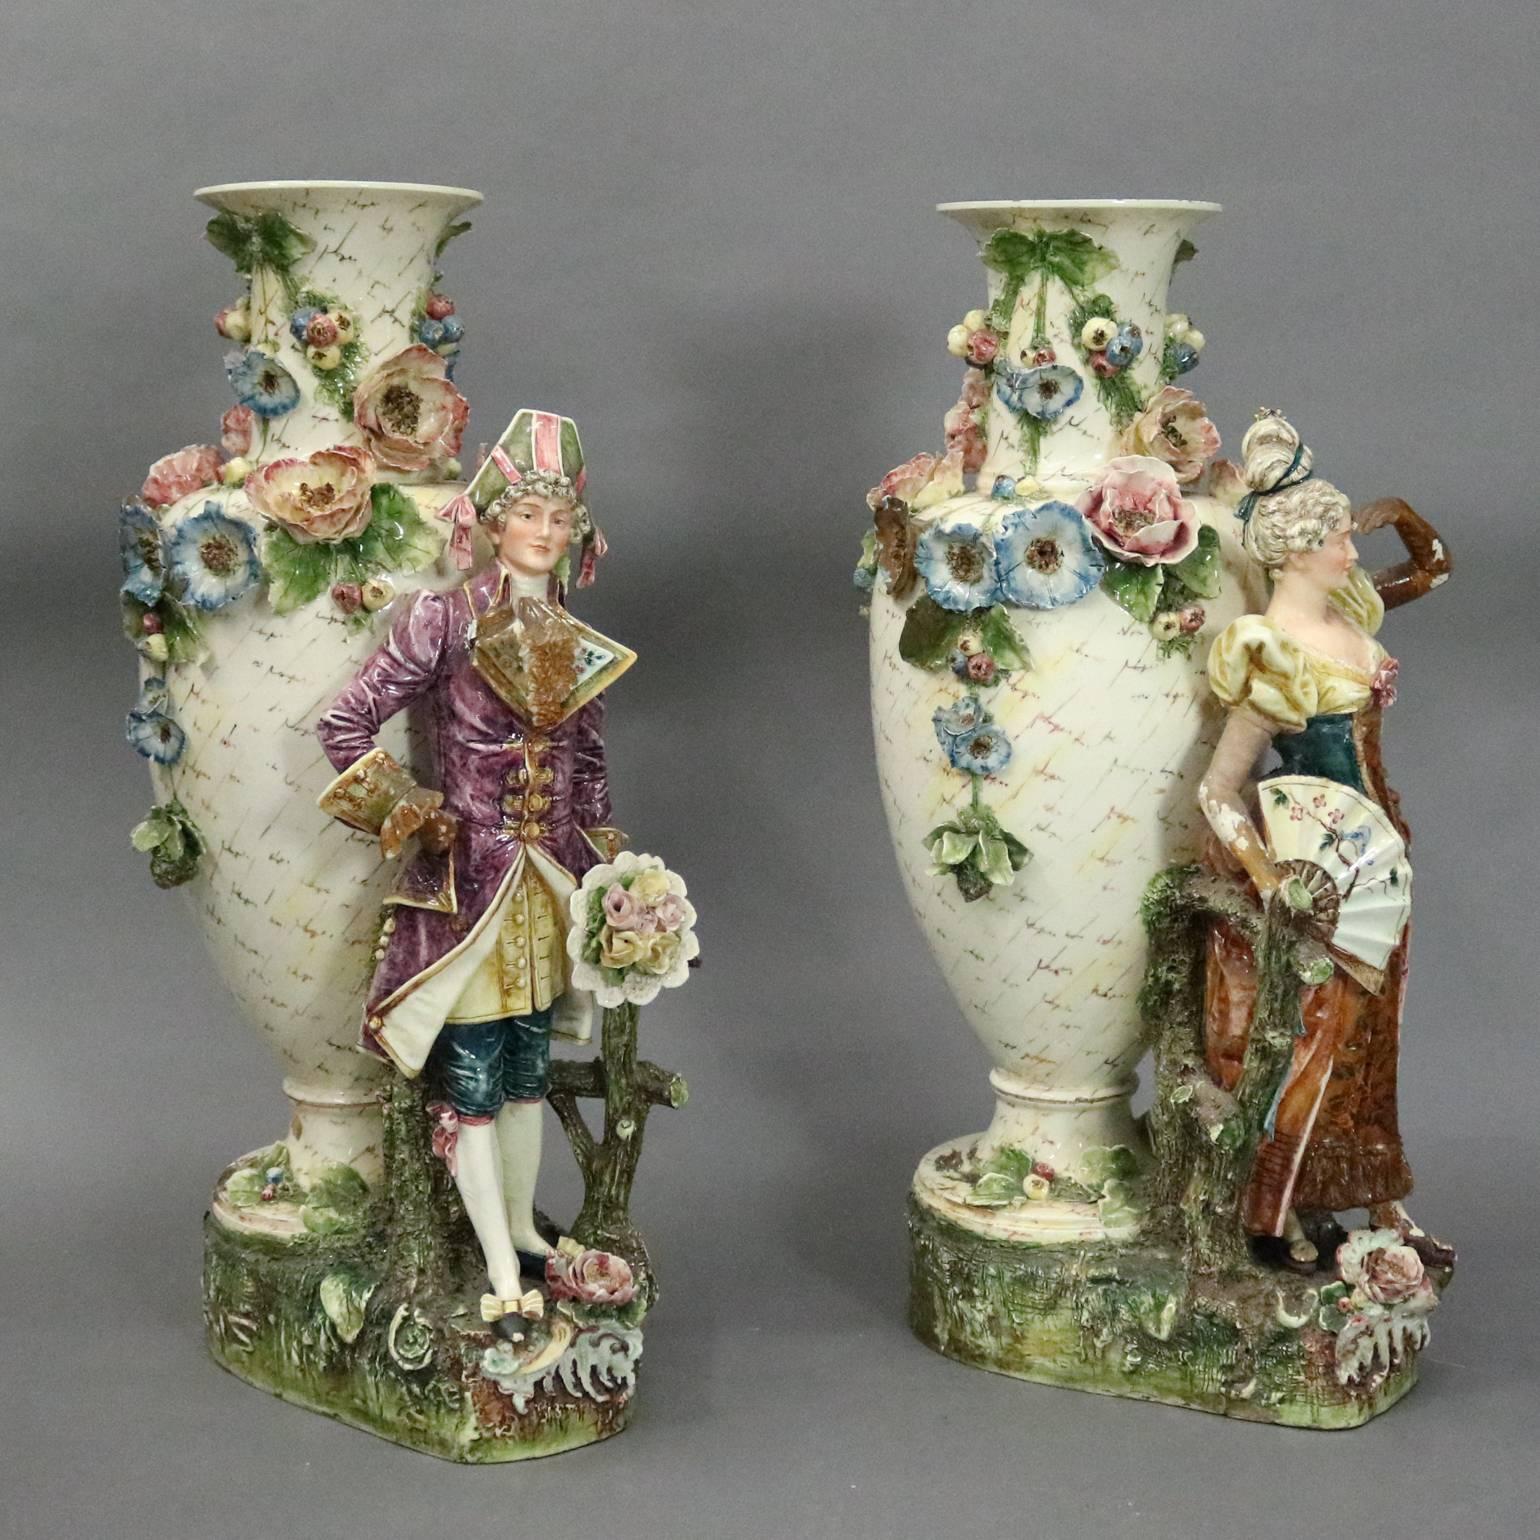 Pair of monumental antique Austrian German majolica figural floor vases feature lady and man in traditional period garb in countryside stetting, applied flowers, circa 1880

Measure: 33" H x 18" D; 4.5" diameter at mouth.